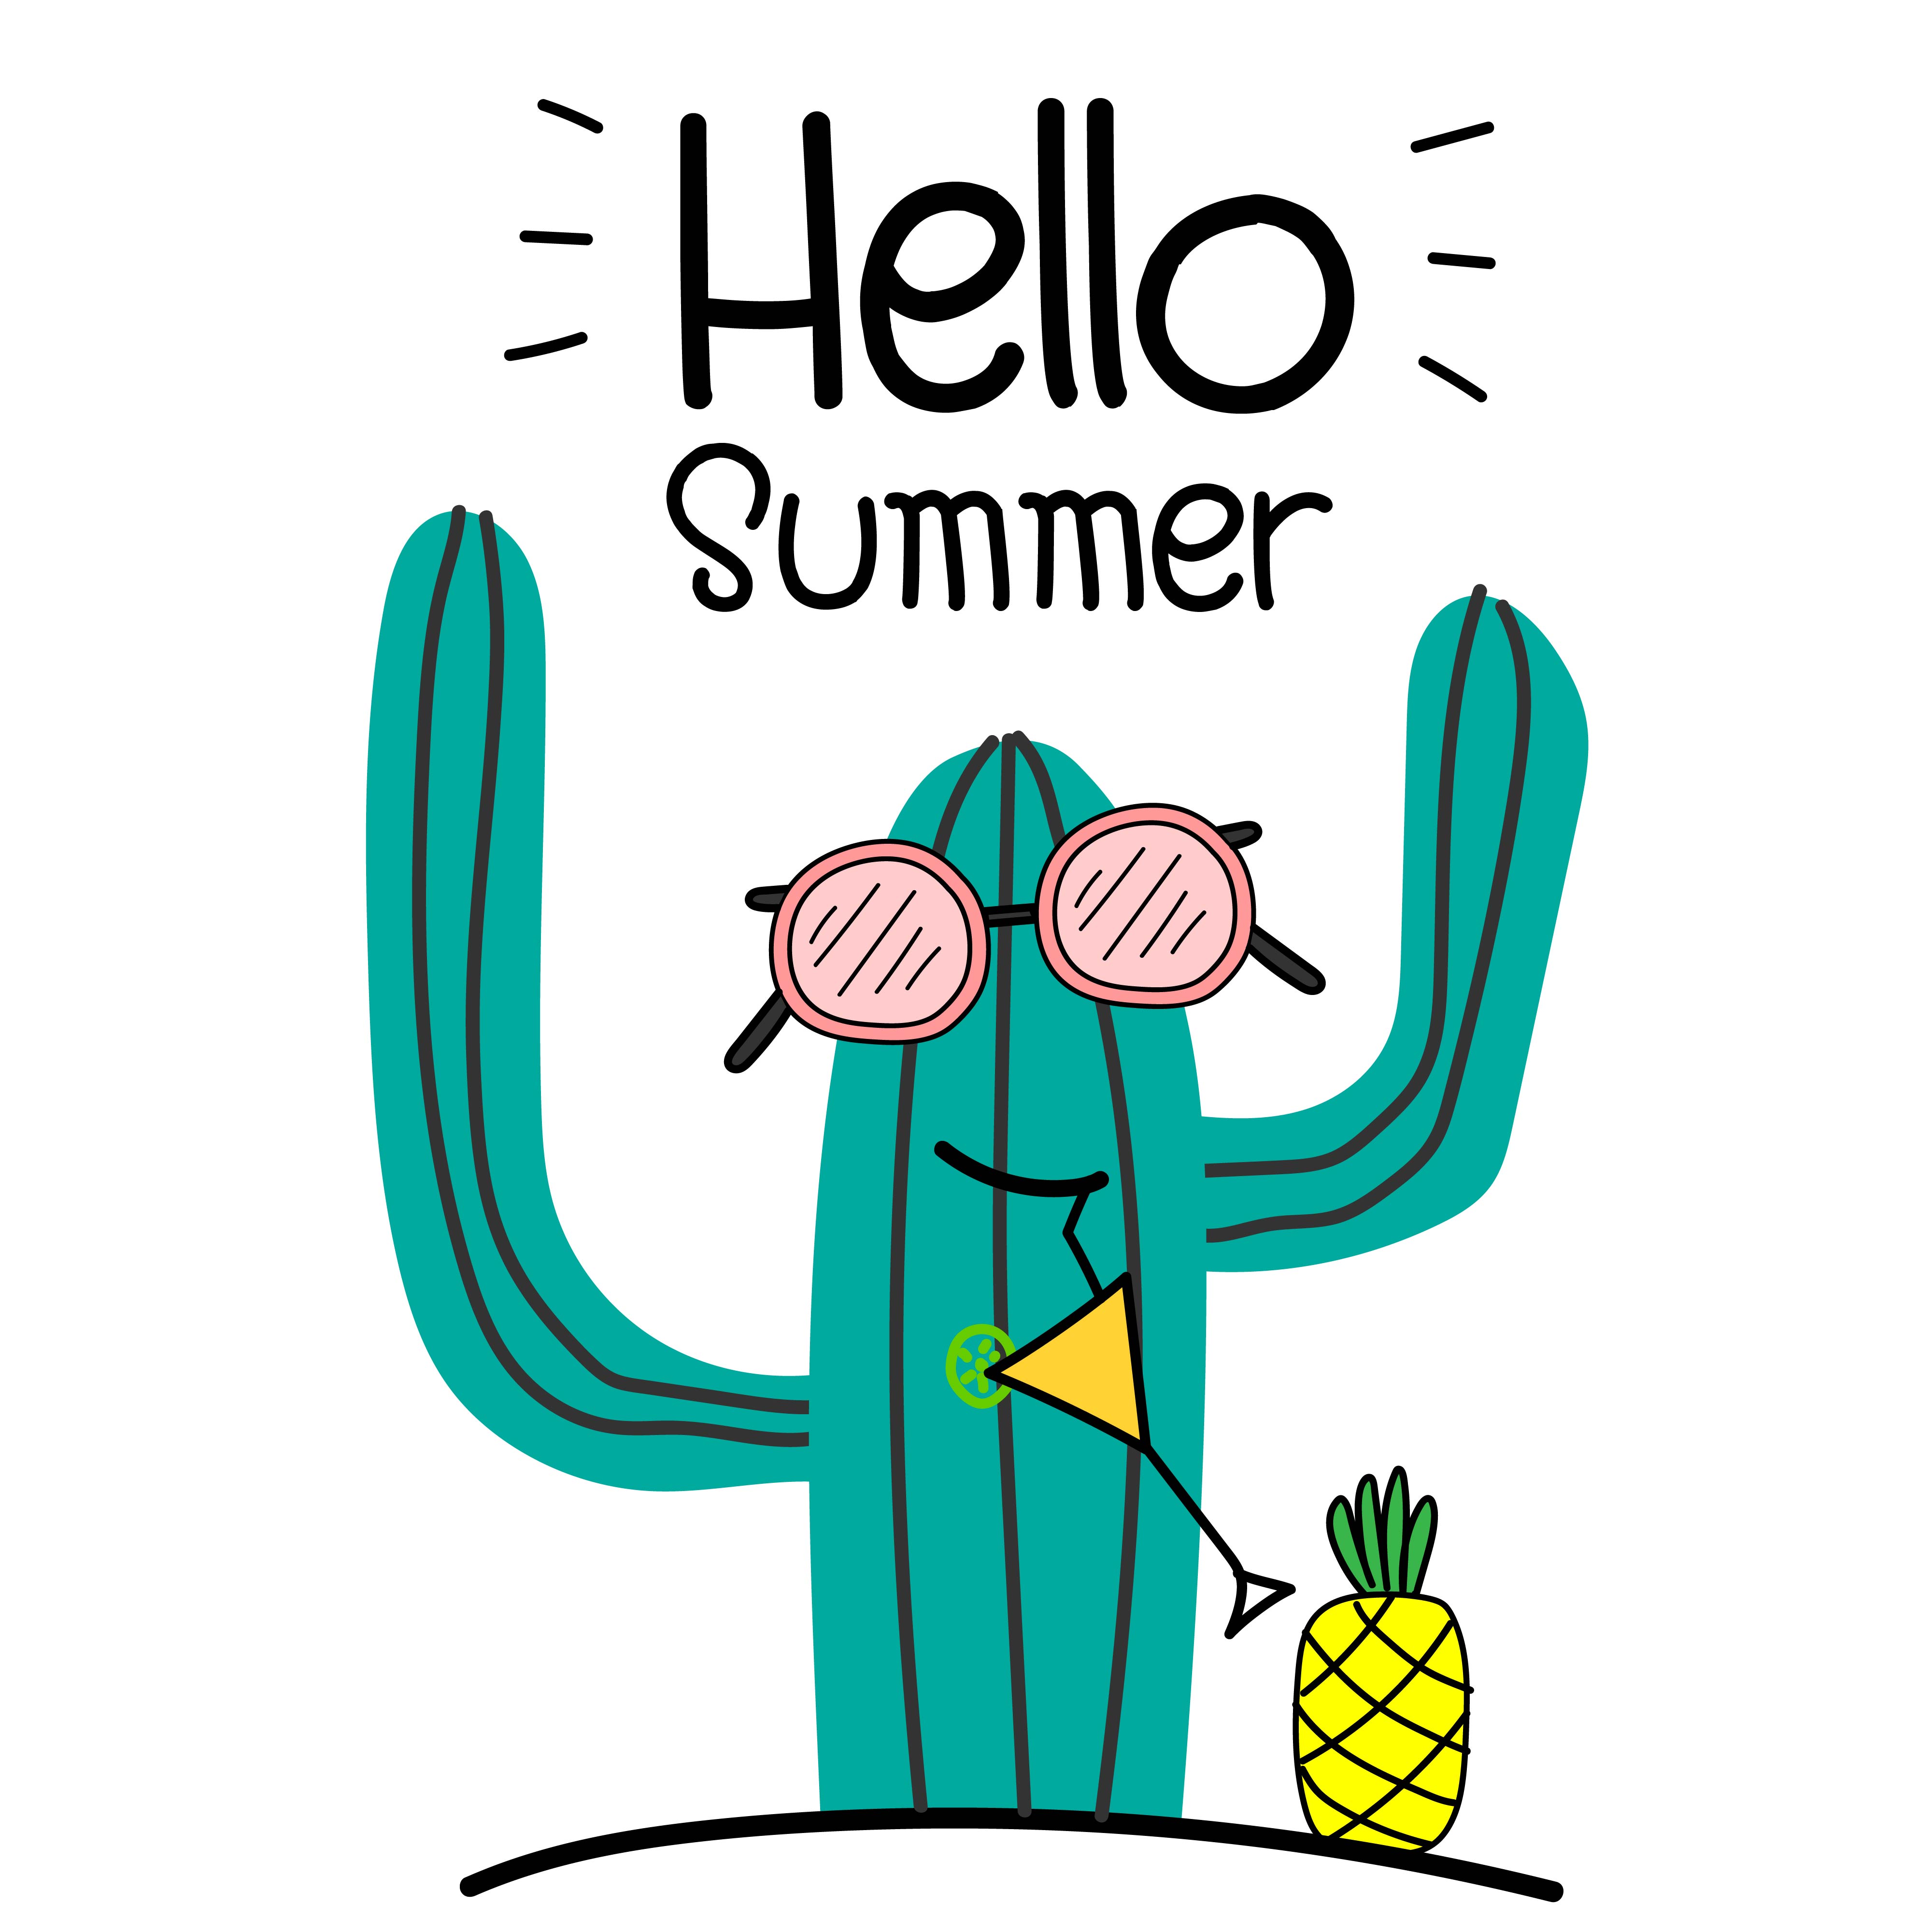 Download Hello Summer Concept With Fun Cactus And Pineapple. 583741 - Download Free Vectors, Clipart ...